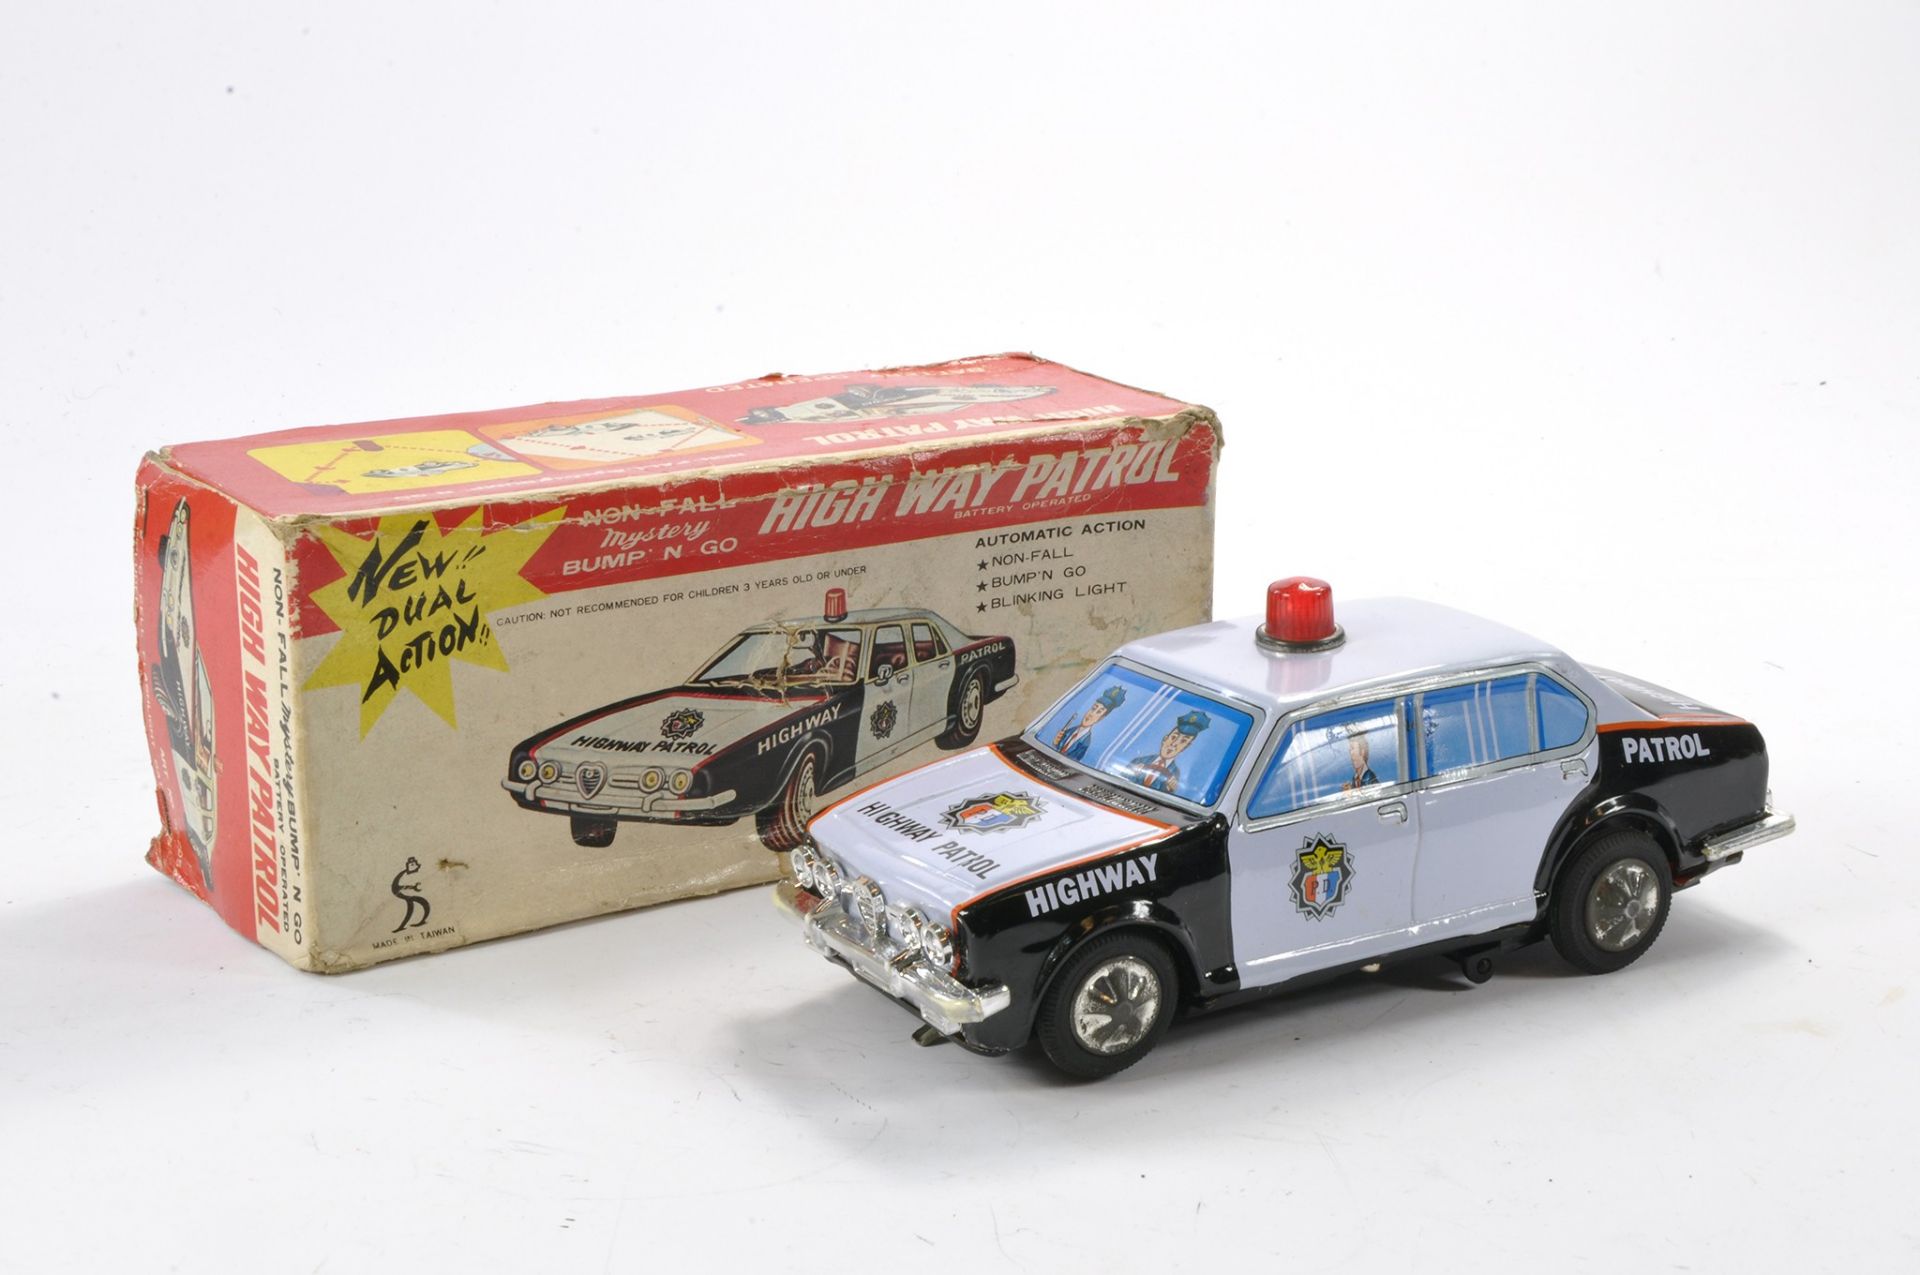 Taiyo Battery Operated Tinplate Mystery Bump n Go High Way Patrol Car. Very good to excellent in